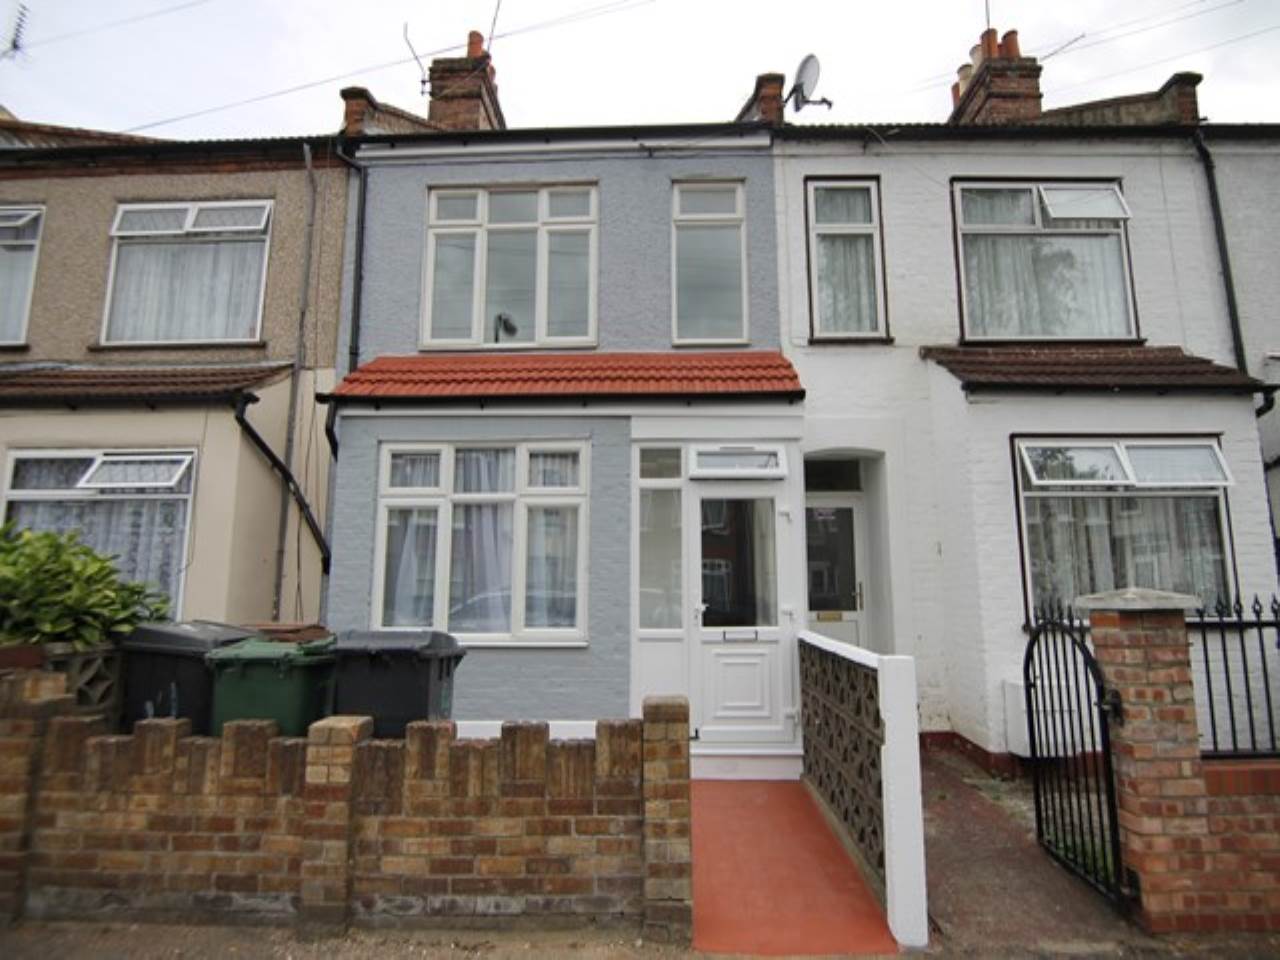 4 bed house to rent in Spencer Road, Walthamstow, E17 